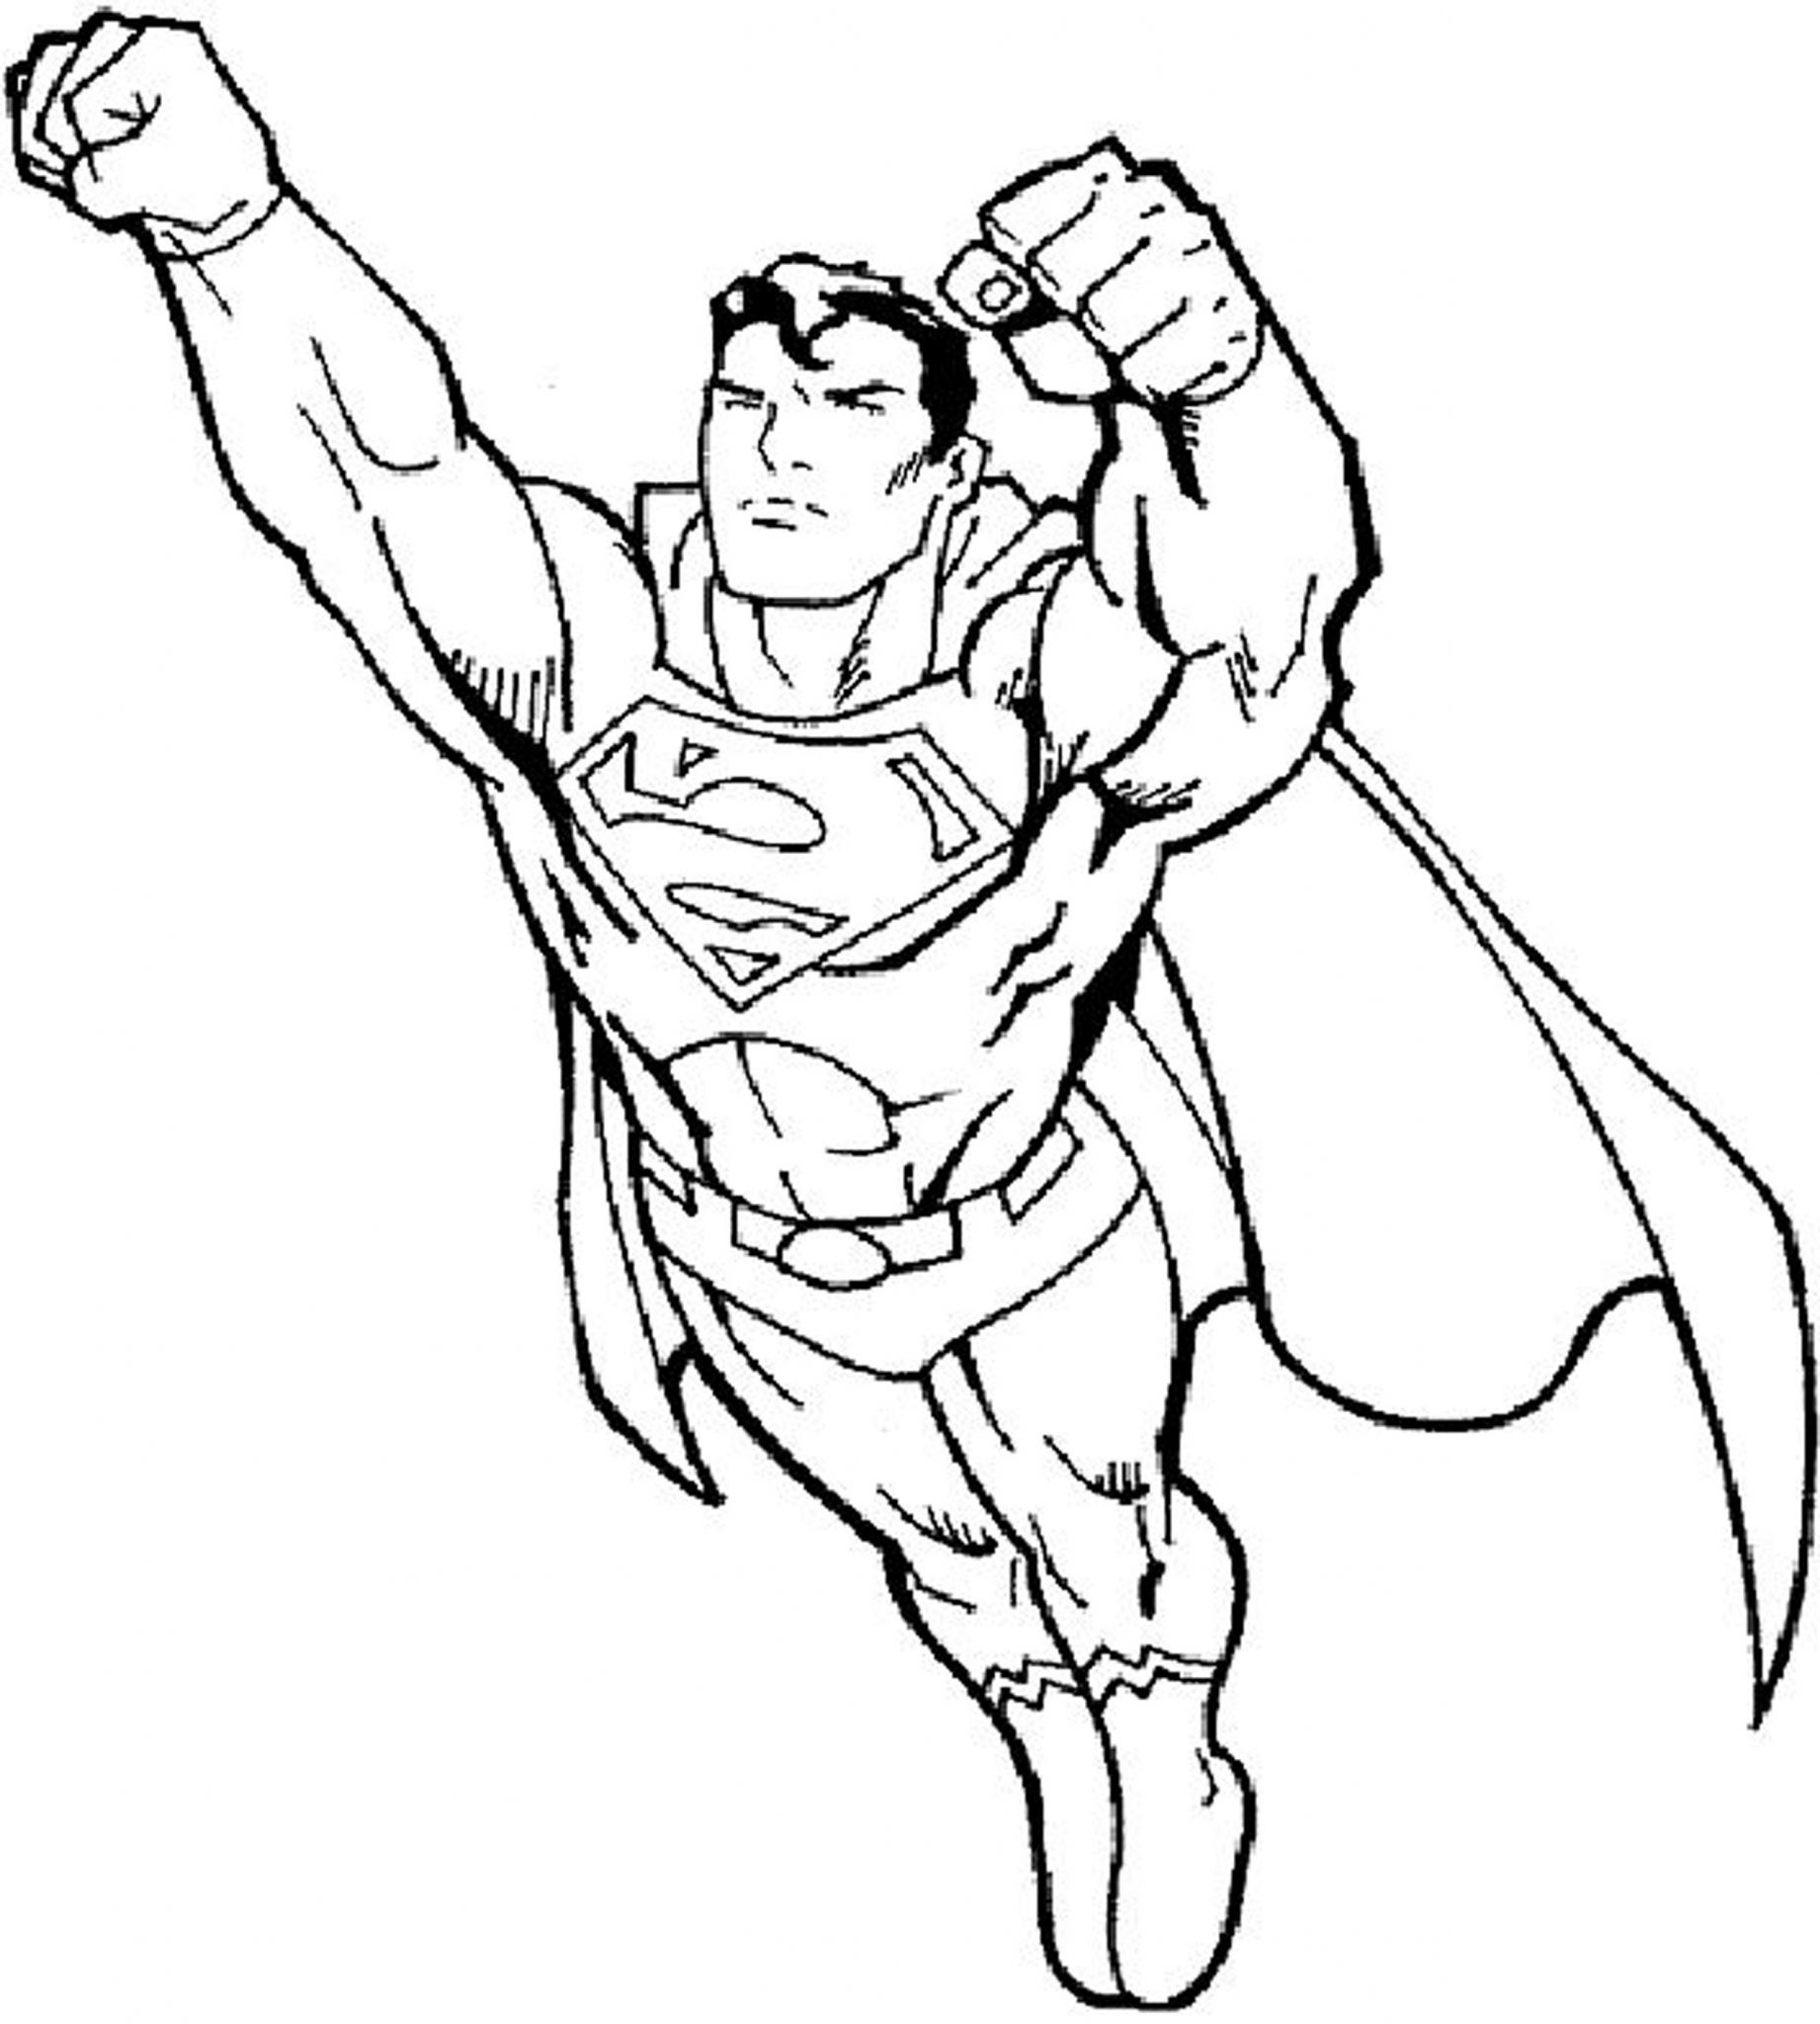 Coloring Sheets For Boys Superman
 free coloring pages for boys superman